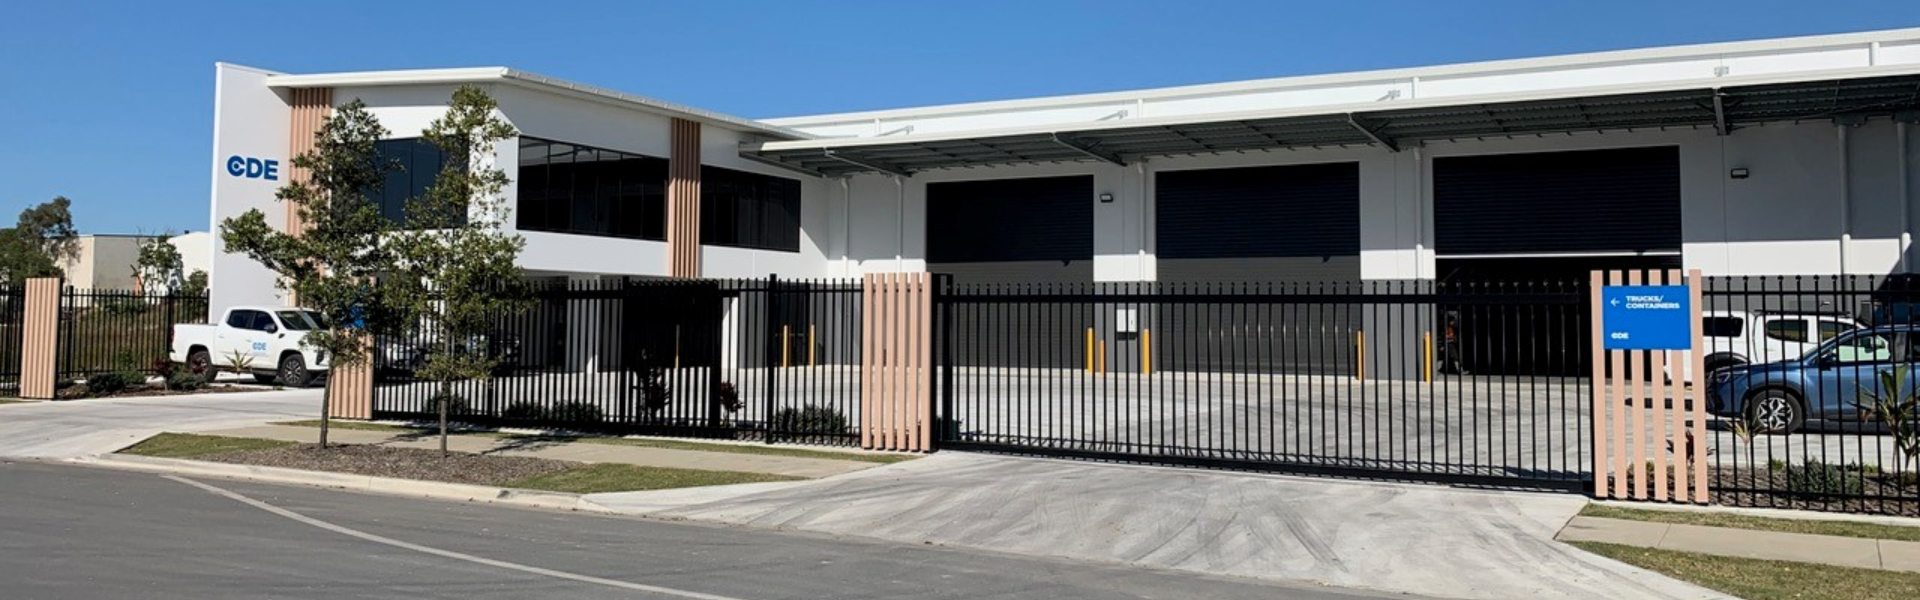 Featured In Waste Management Review: CDE Supports Customers With New Australasia Headquarters